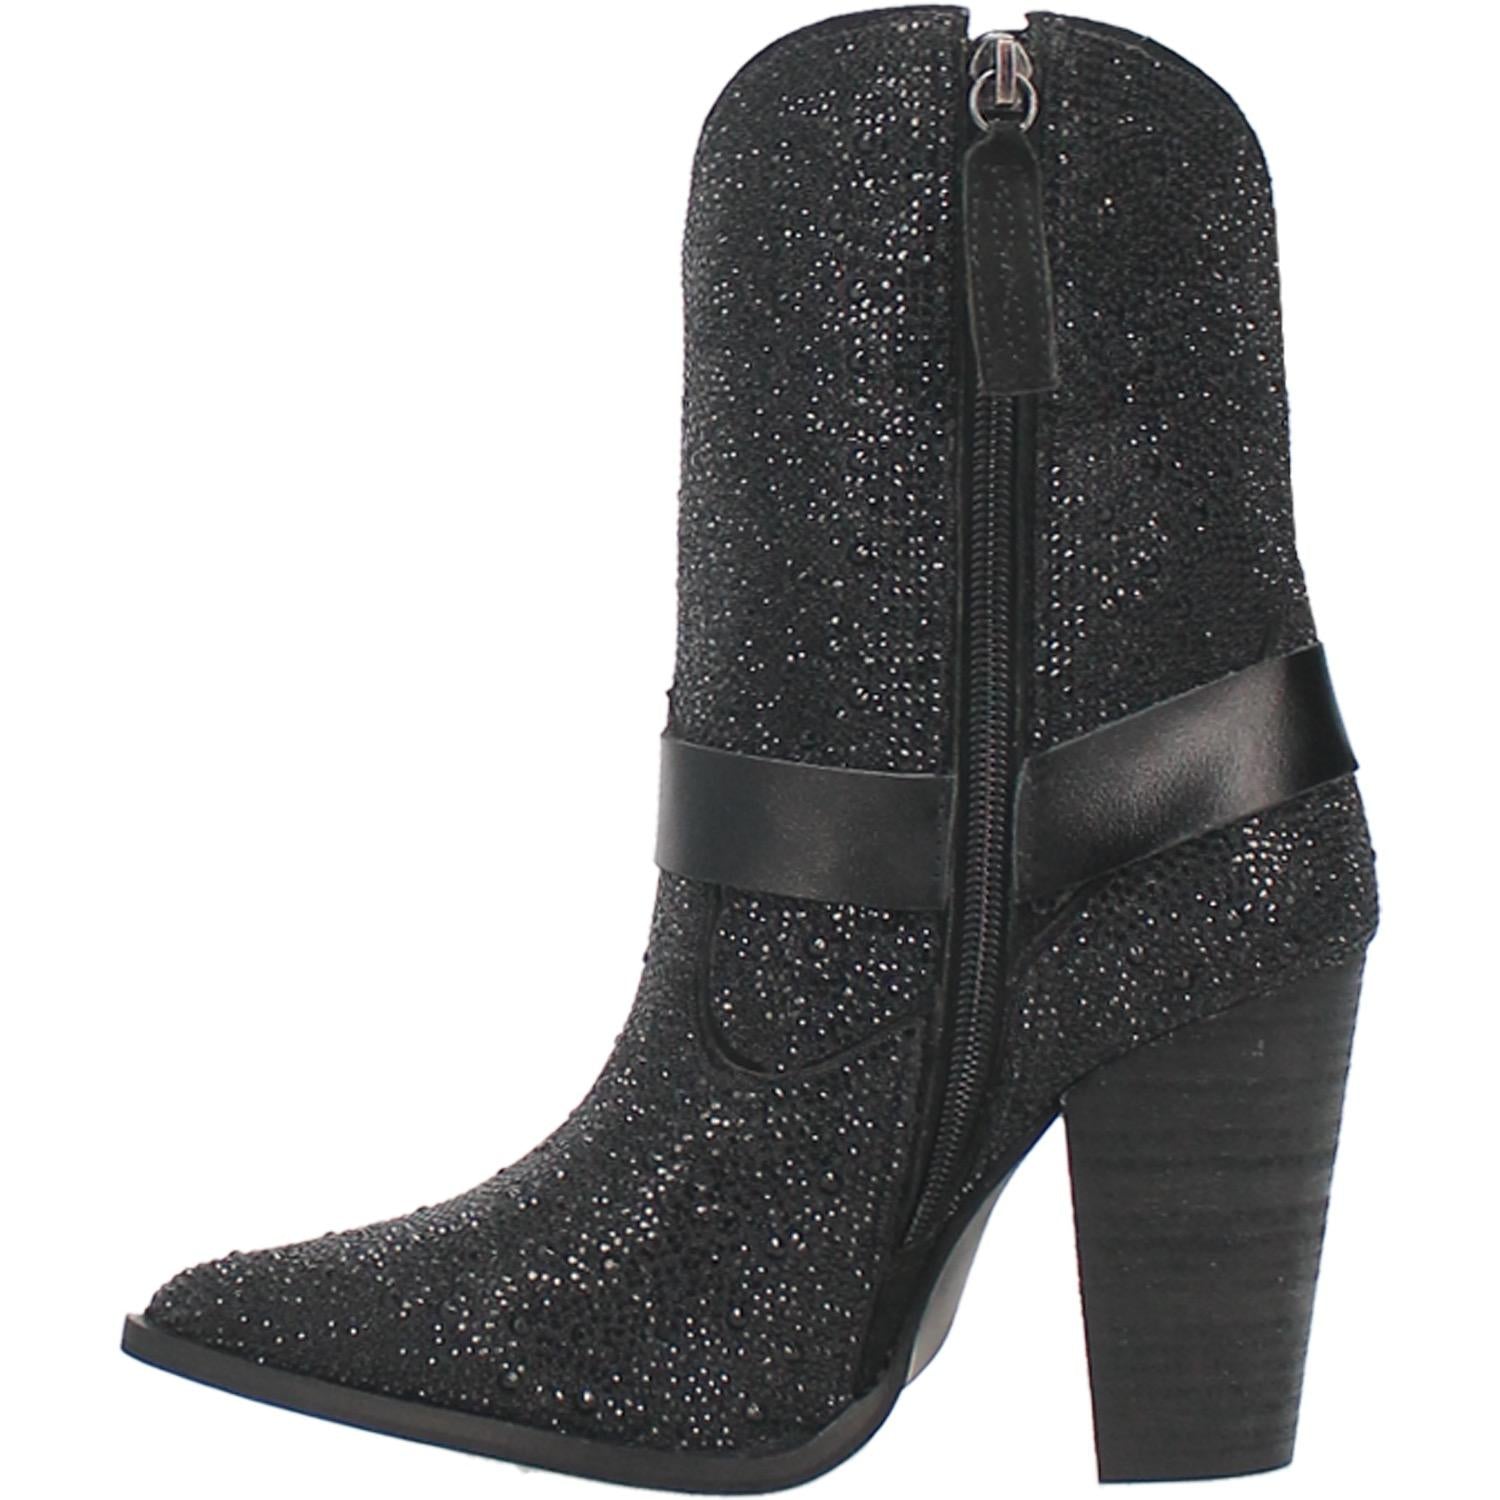 A small black bootie with rhinestones top to bottom, tall heel, V cut at the top, matching straps, and leather straps going through the middle and under the boot. Item is pictured on a plain white background